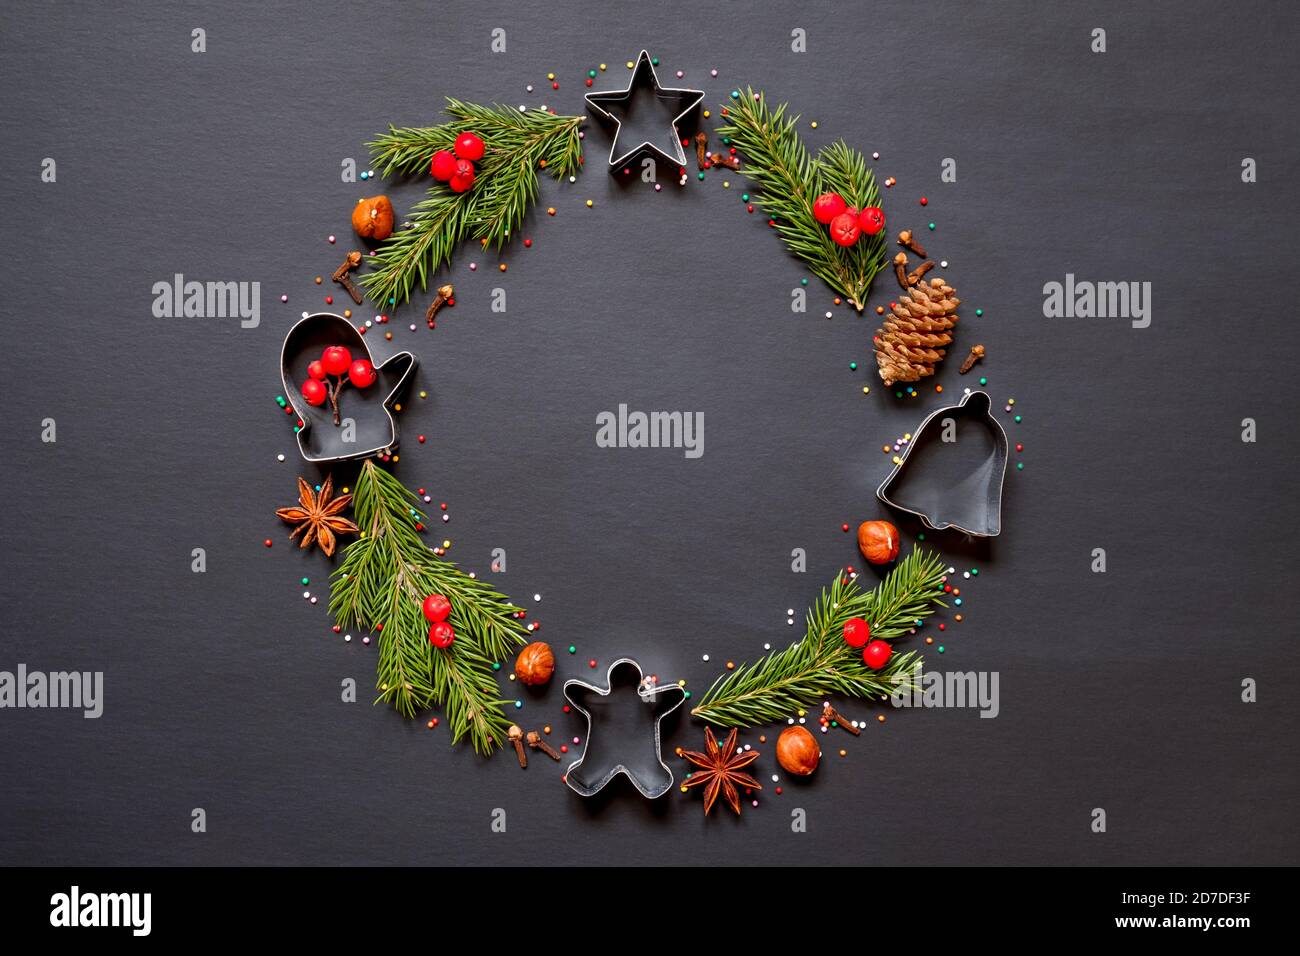 Christmas wreath made from molds for cookies, spices and a Christmas tree on a black background with copy space. Stock Photo